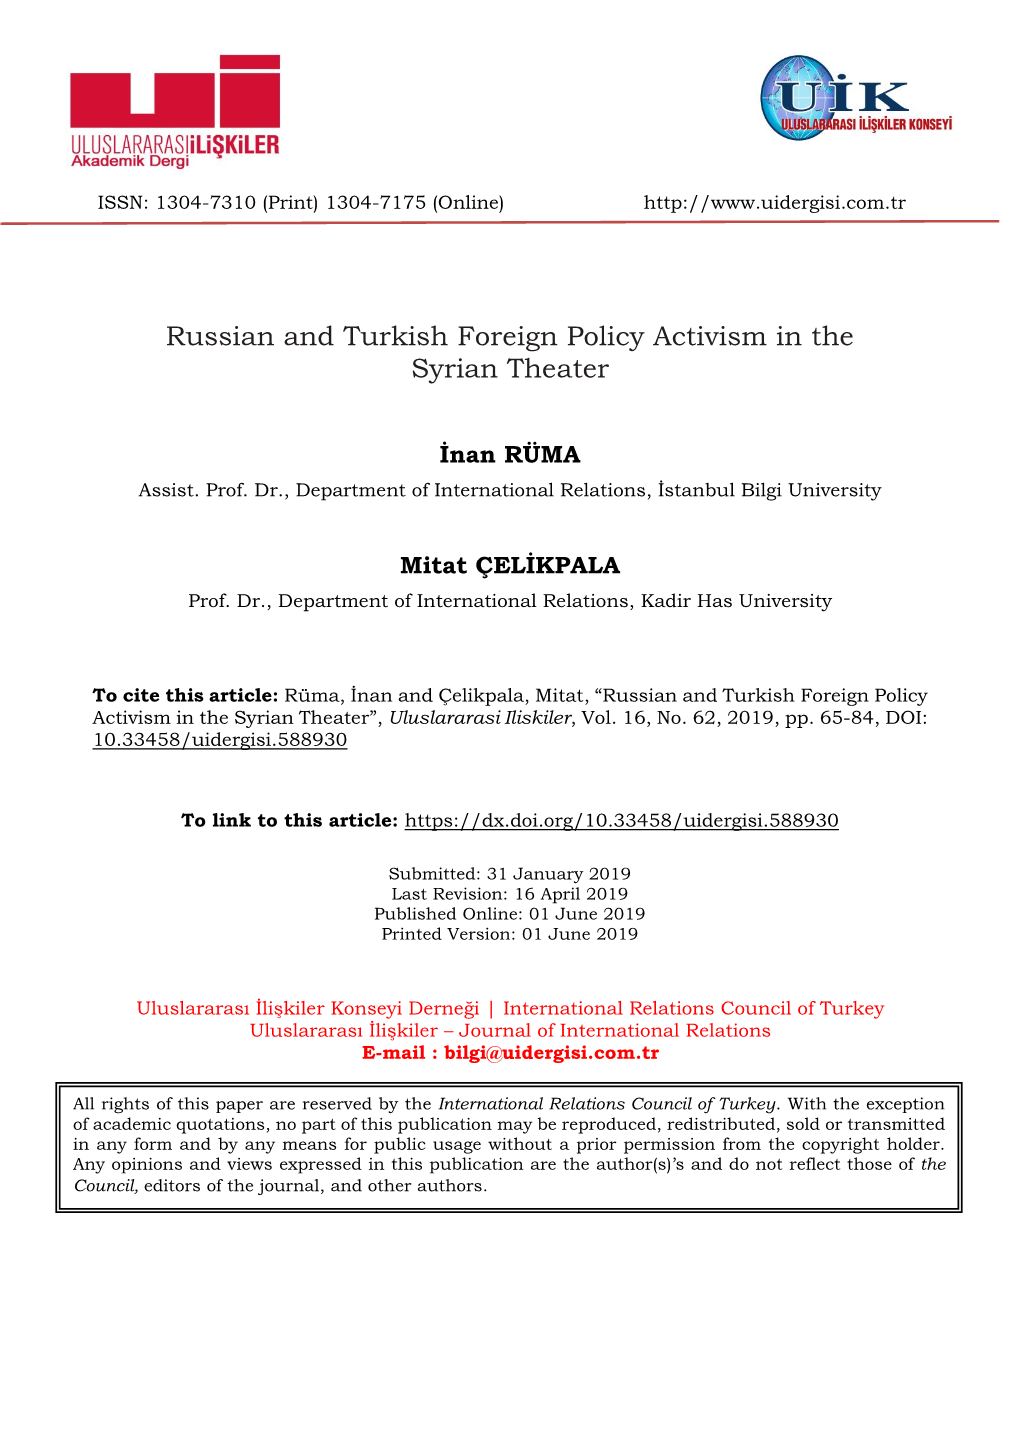 Russian and Turkish Foreign Policy Activism in the Syrian Theater